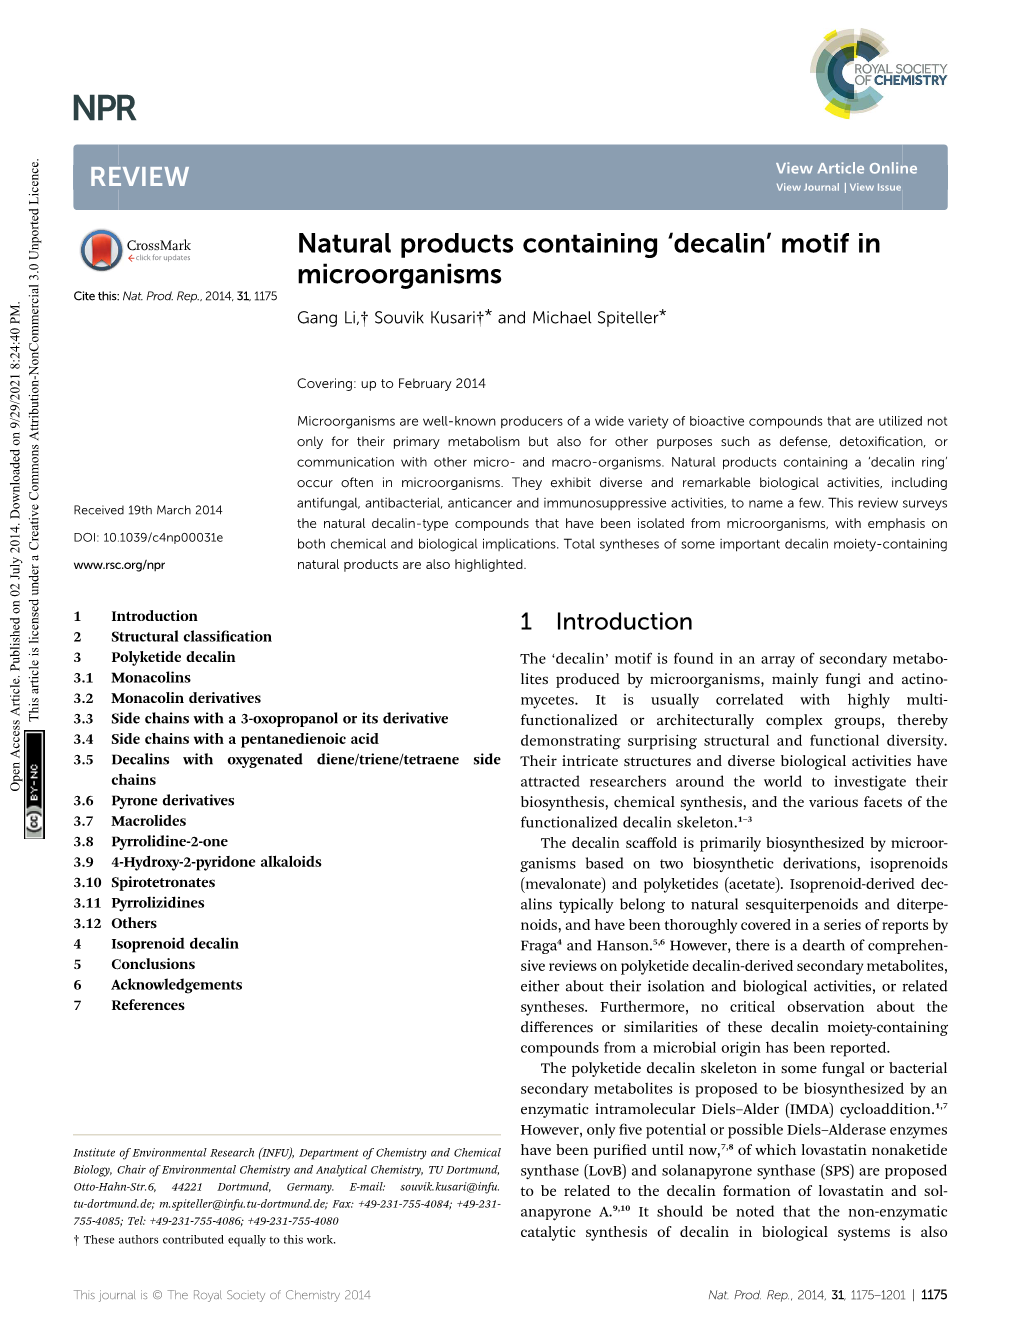 Natural Products Containing 'Decalin' Motif in Microorganisms